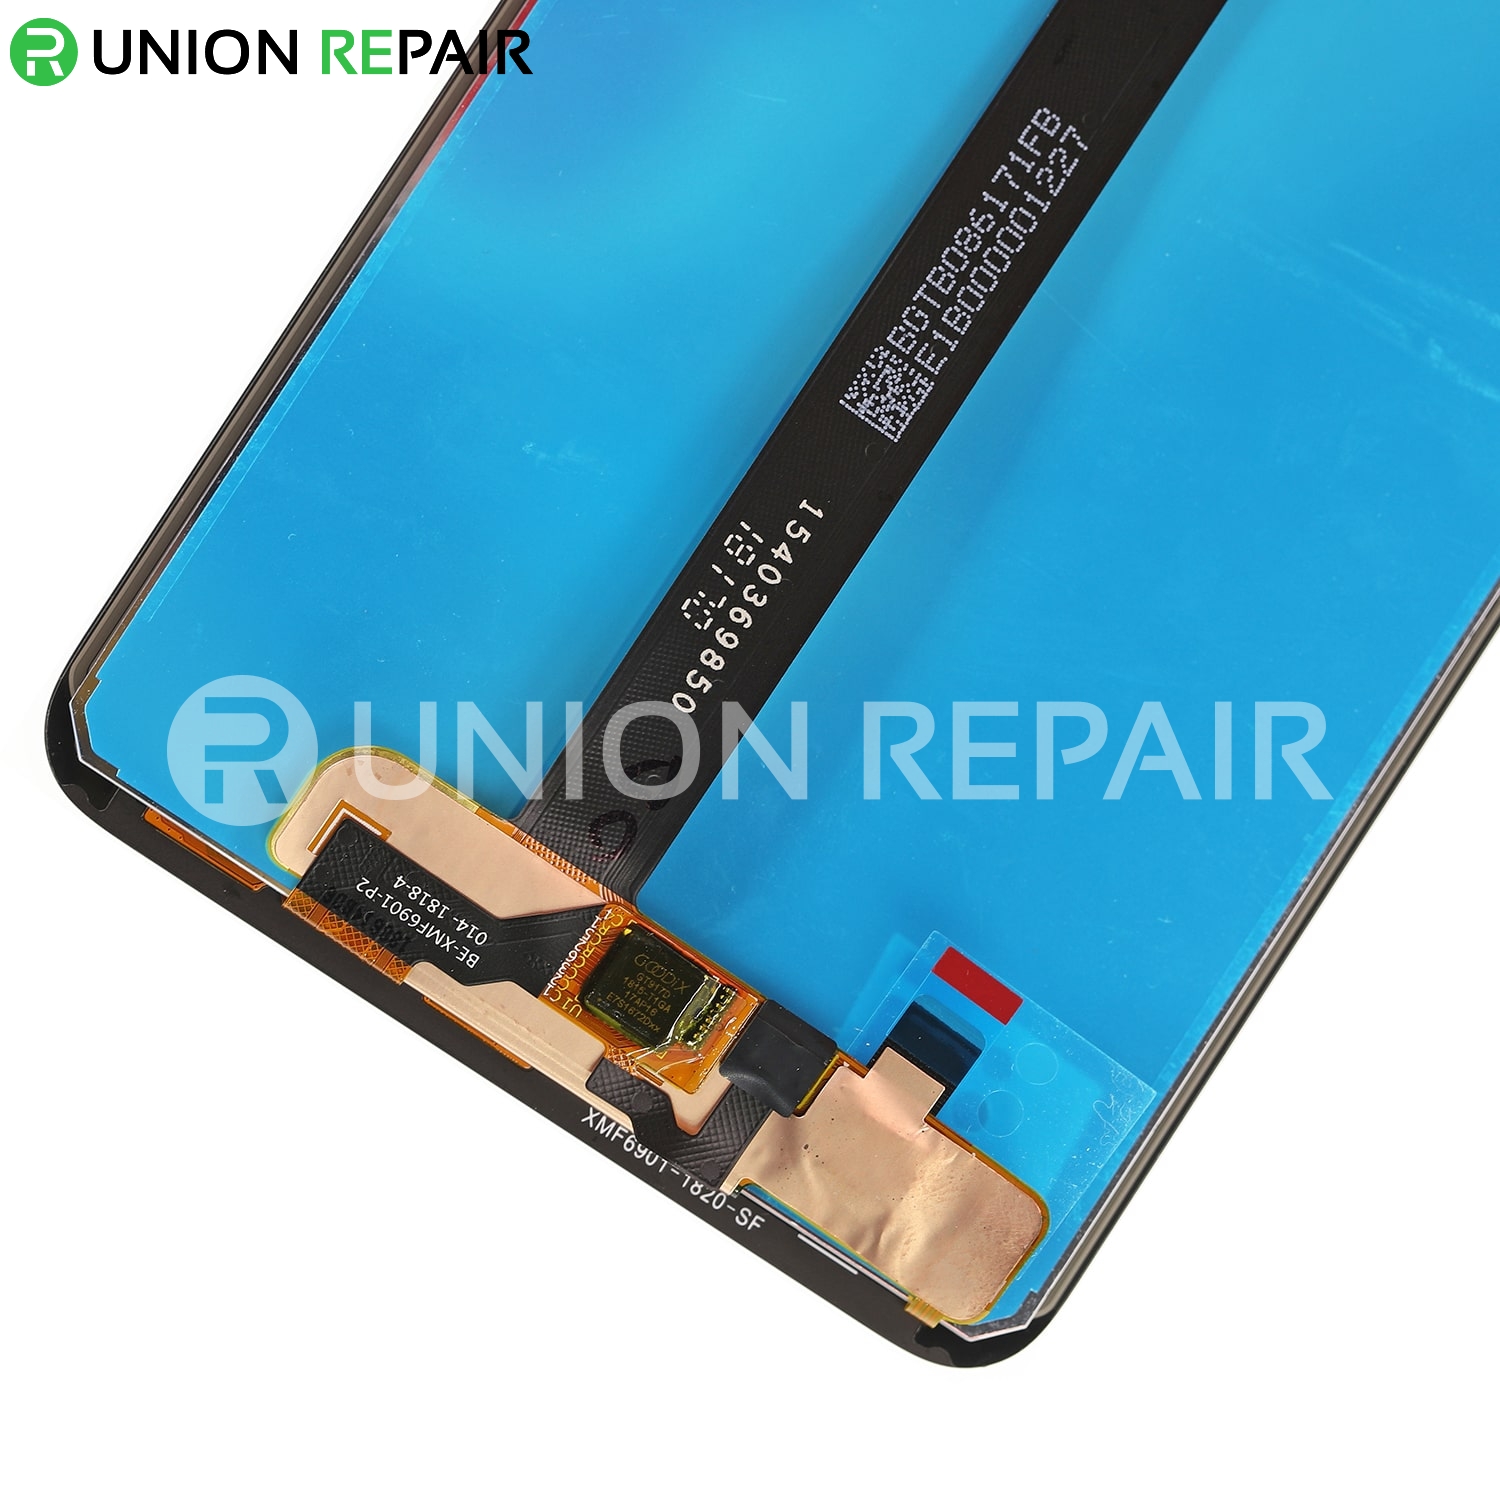 Replacement for XiaoMi MAX 3 LCD Screen Digitizer - Black